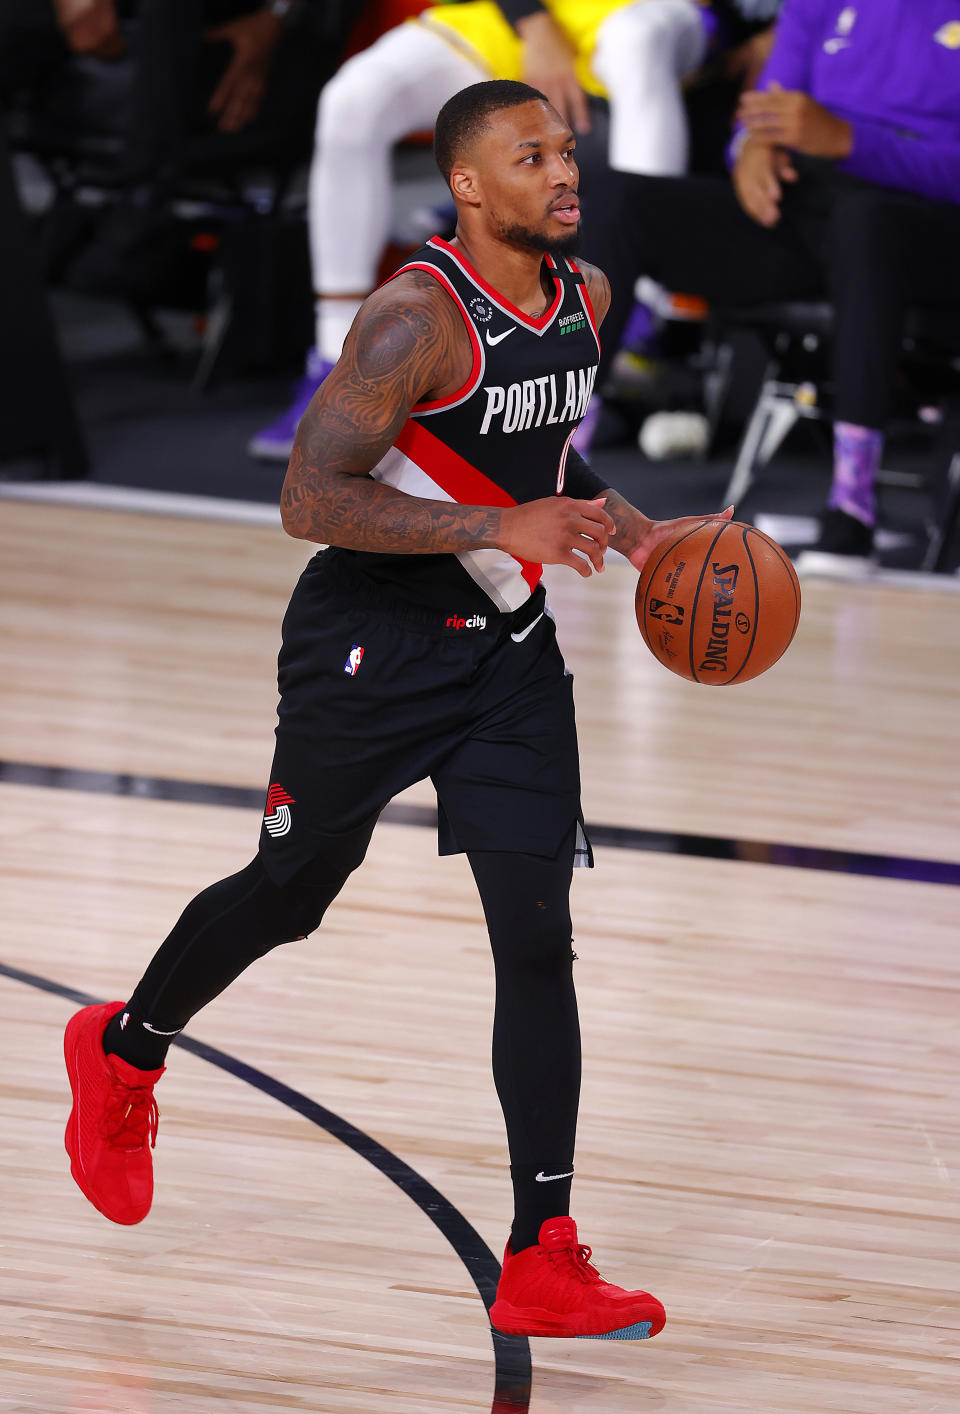 Damian Lillard of the Portland Trail Blazers dribbles the ball during the second quarter against the Los Angeles Lakers in Game 1 of an NBA basketball first-round playoff series, Tuesday, Aug. 18, 2020, in Lake Buena Vista, Fla. (Mike Ehrmann/Pool Photo via AP)